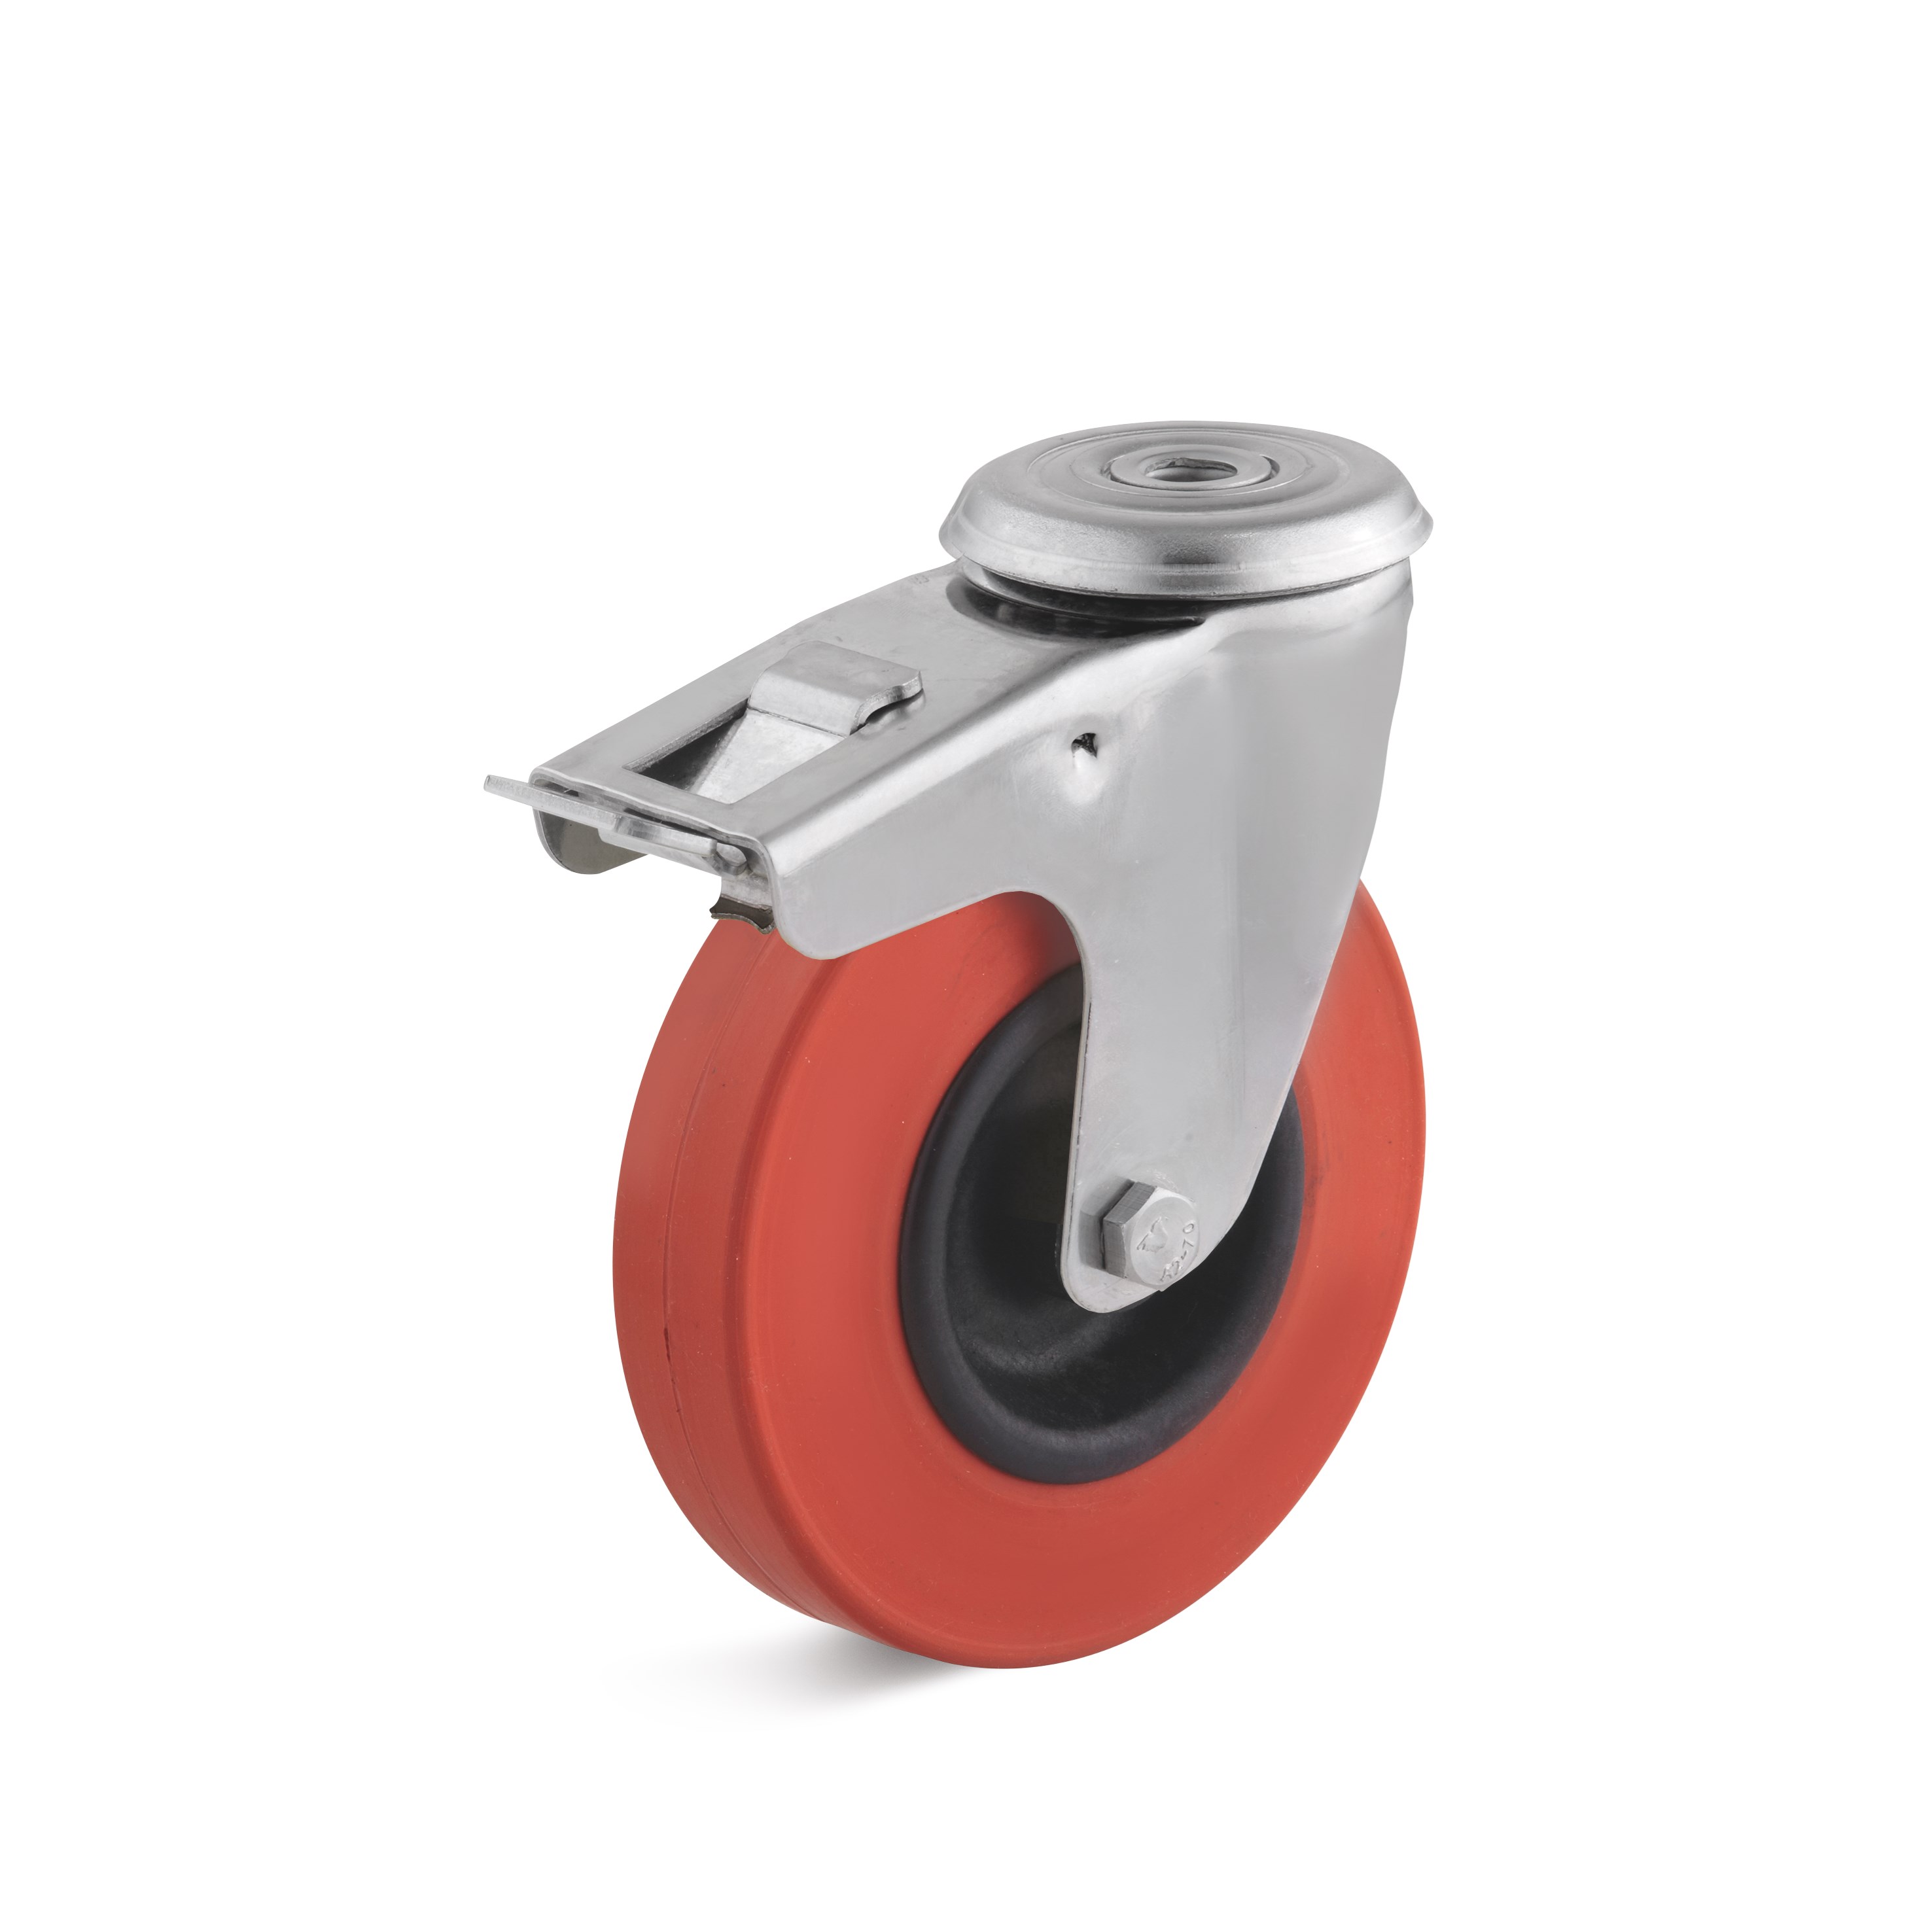 Stainless steel swivel castor with double stop and bolt hole, heat-resistant wheel